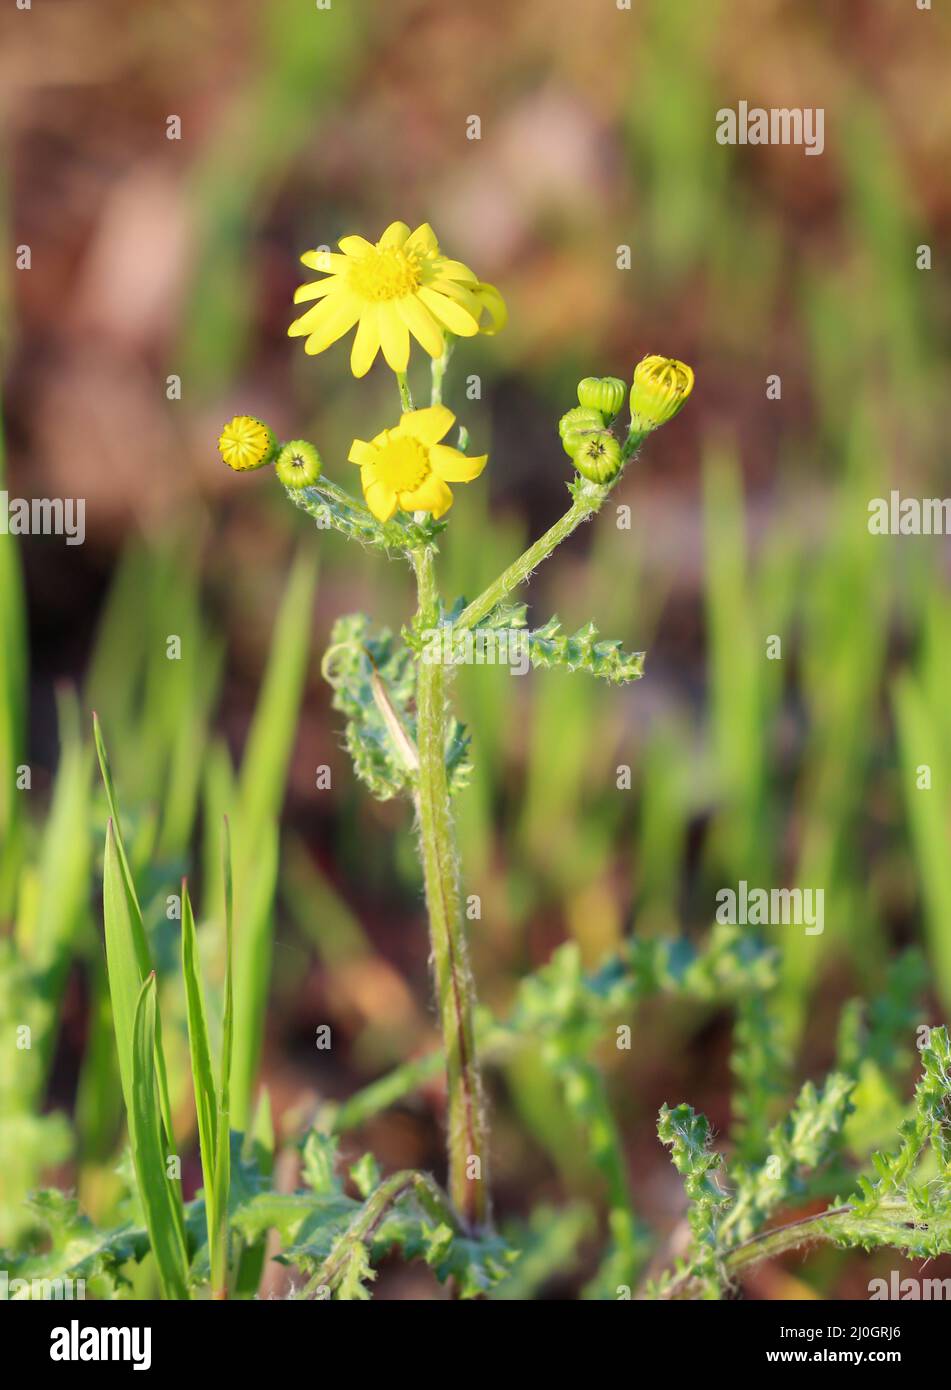 A close-up of a daisy, a yellow flowering meadow plant. Jacob ragwort. Stock Photo